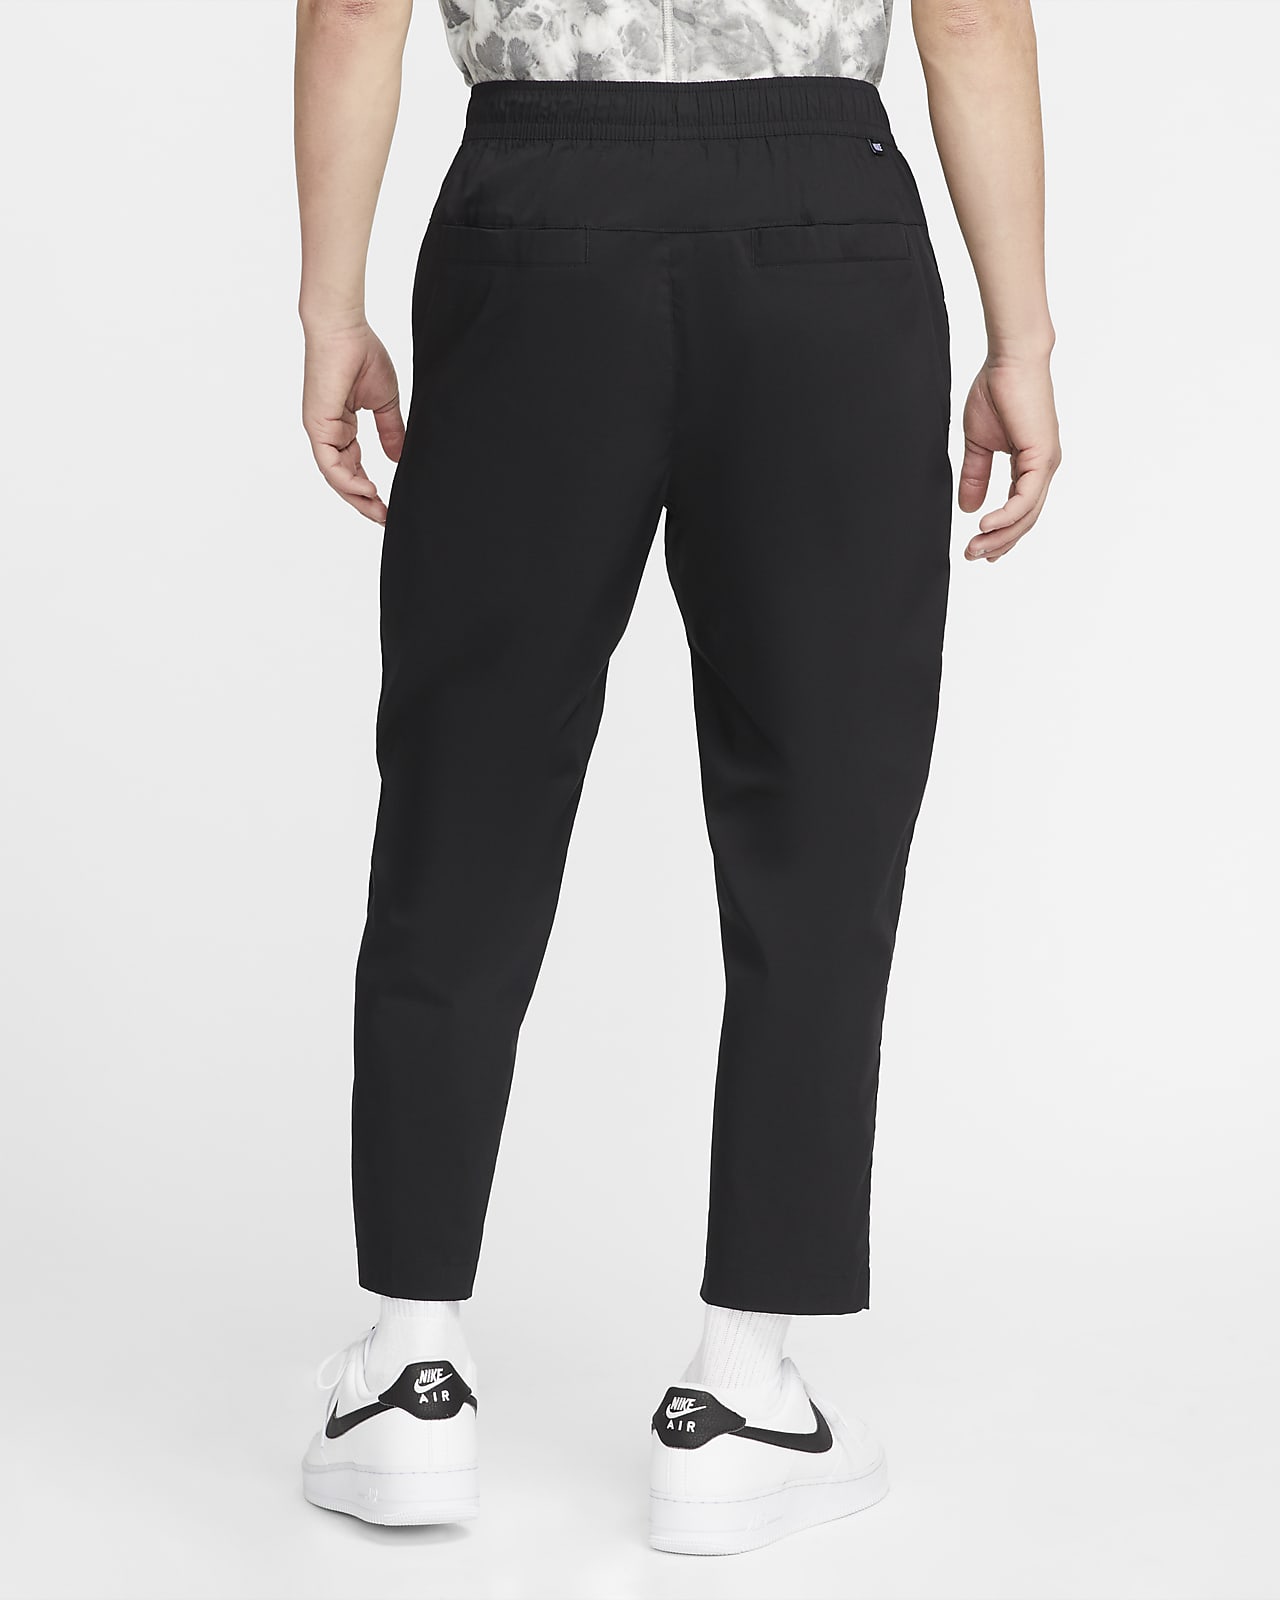 Track pants for men Essential track pants for working out relaxing and  more   Times of India